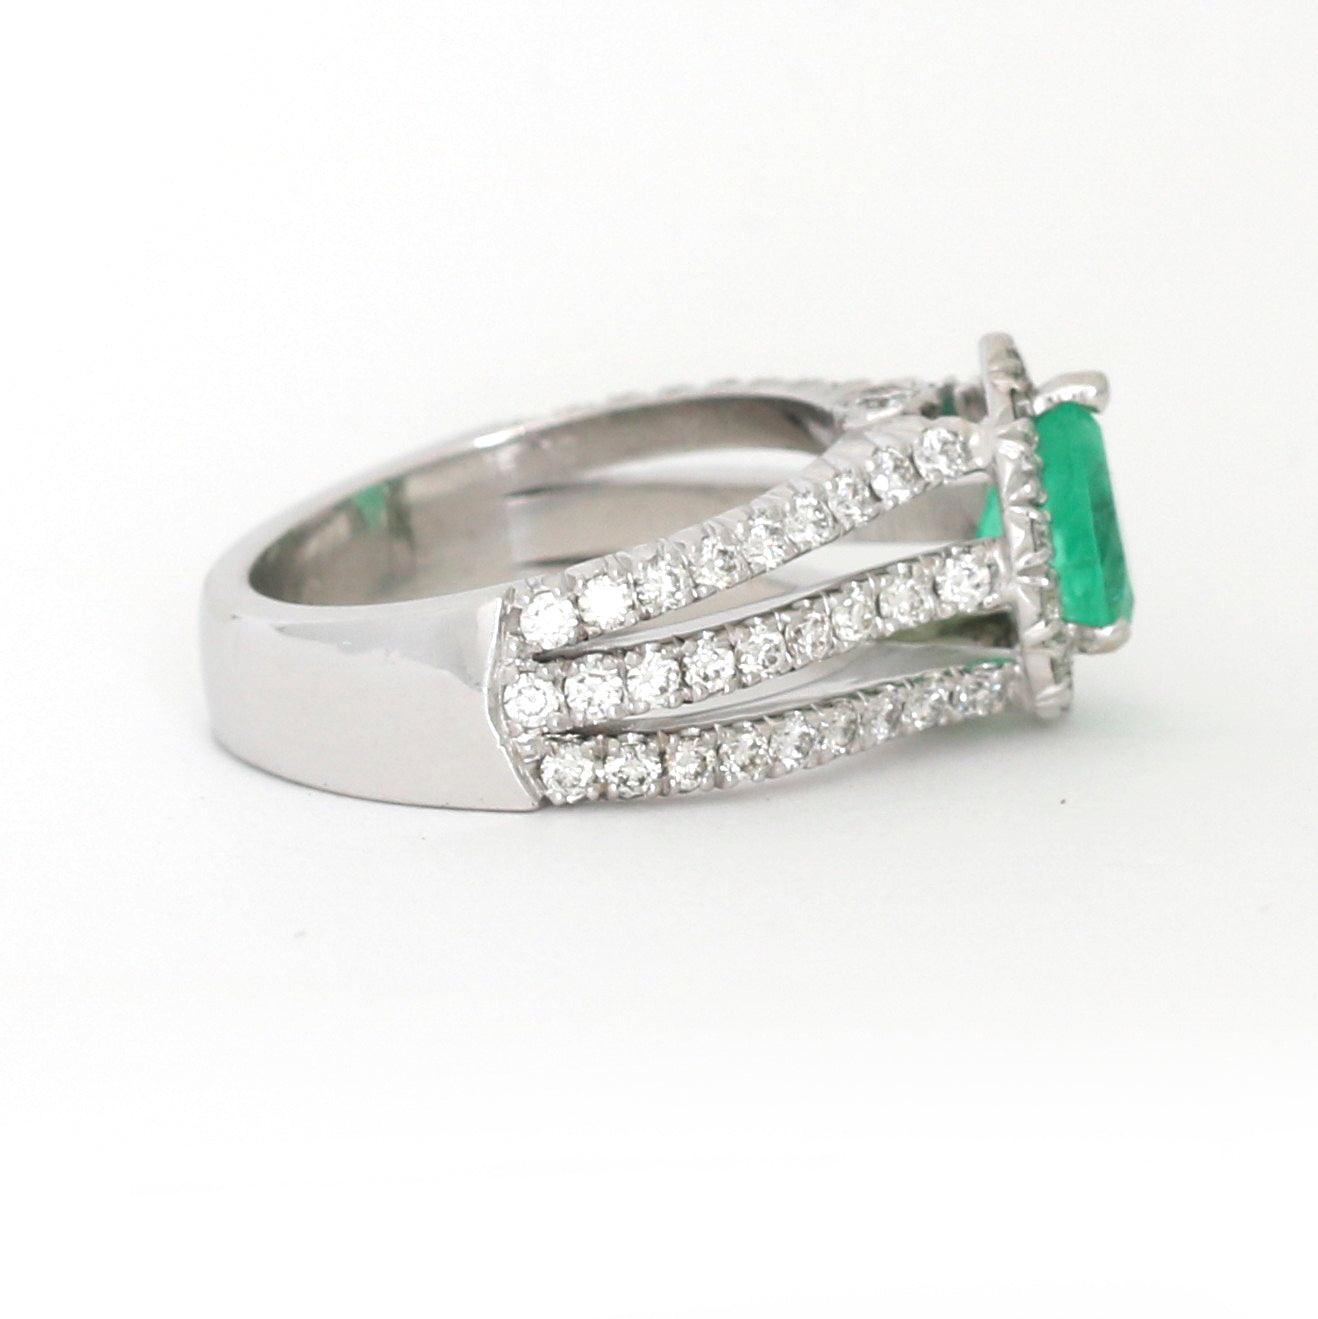 Women's Colombian Emerald and Diamond Ring 18k White Gold 1.75 cttw - 31 Jewels Inc.